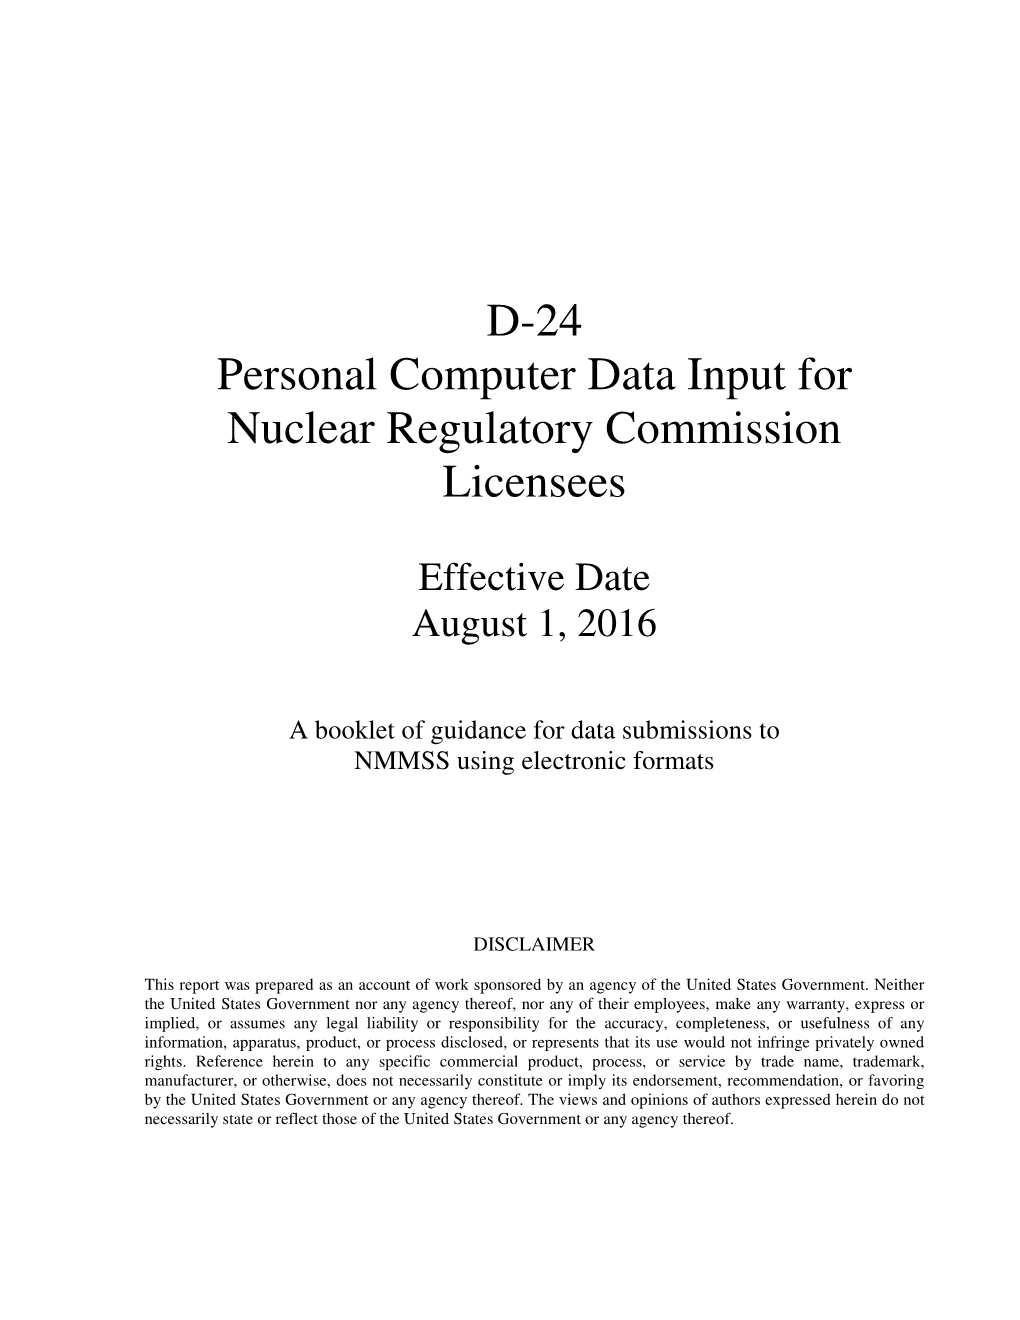 D-24 Personal Computer Data Input for Nuclear Regulatory Commission Licensees